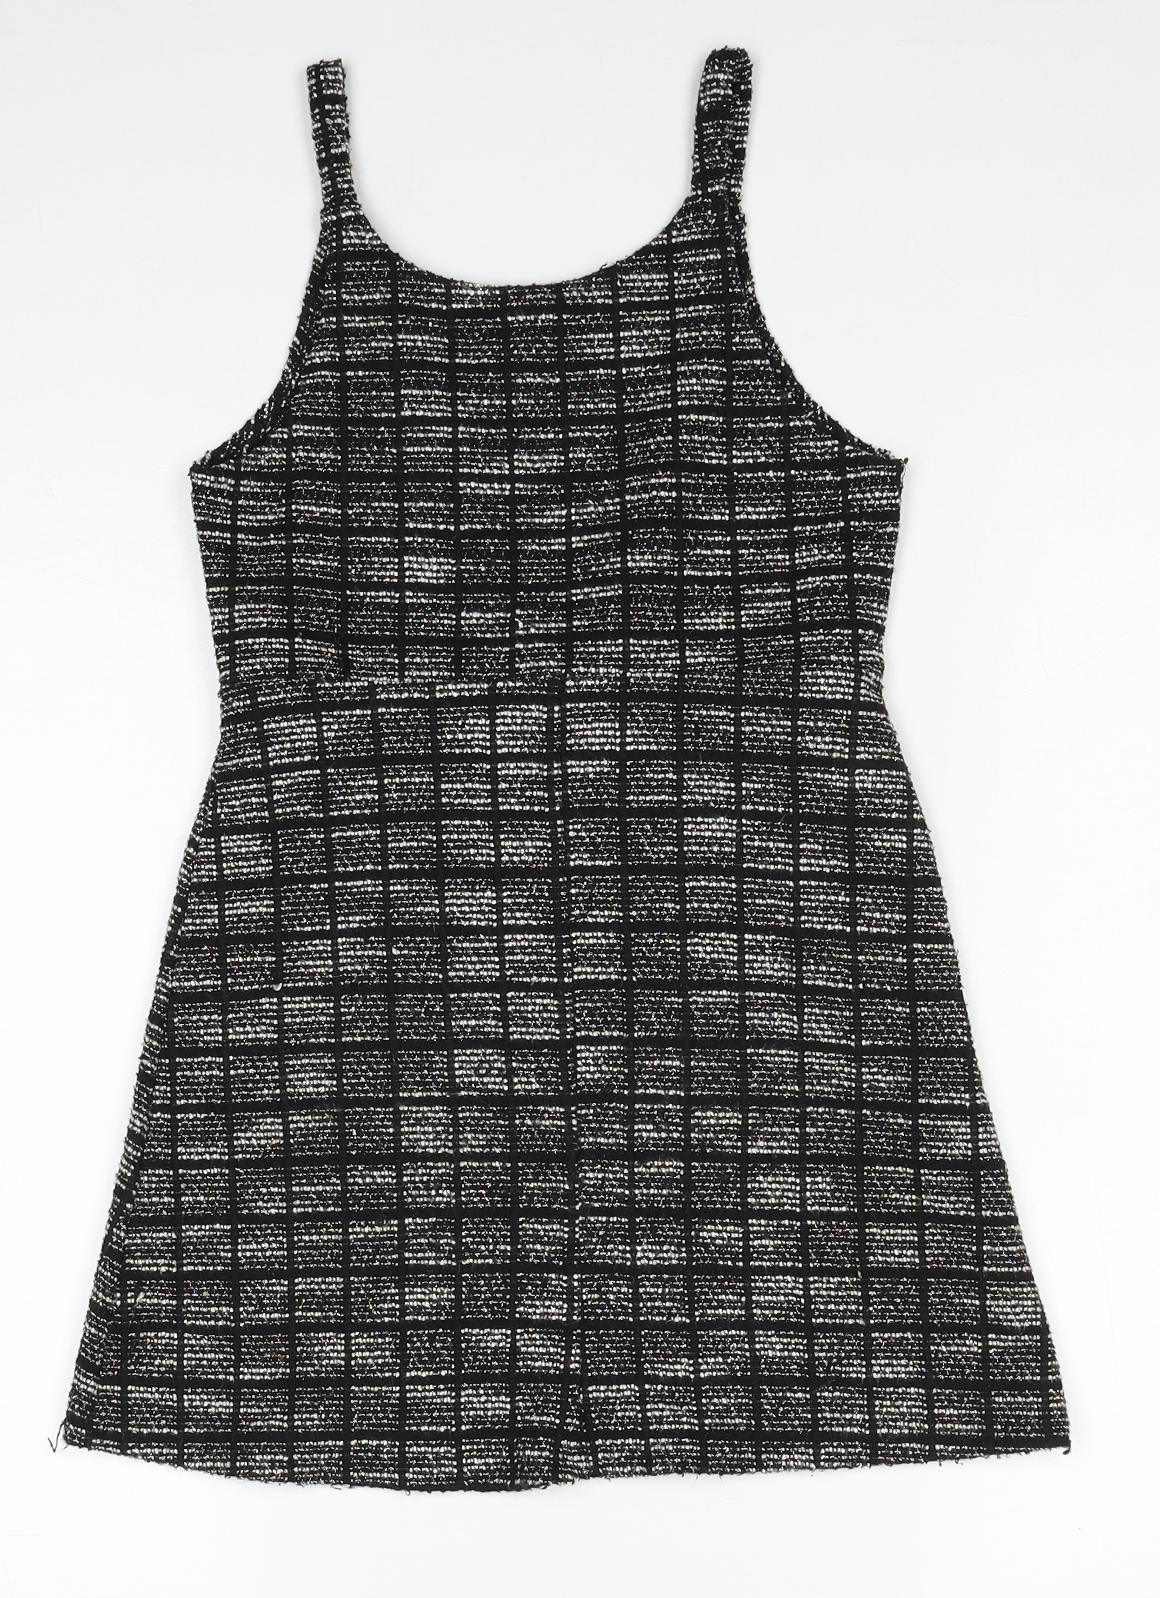 Primark Girls Black Check Cotton Tank Dress Size 8-9 Years Roll Neck Pullover